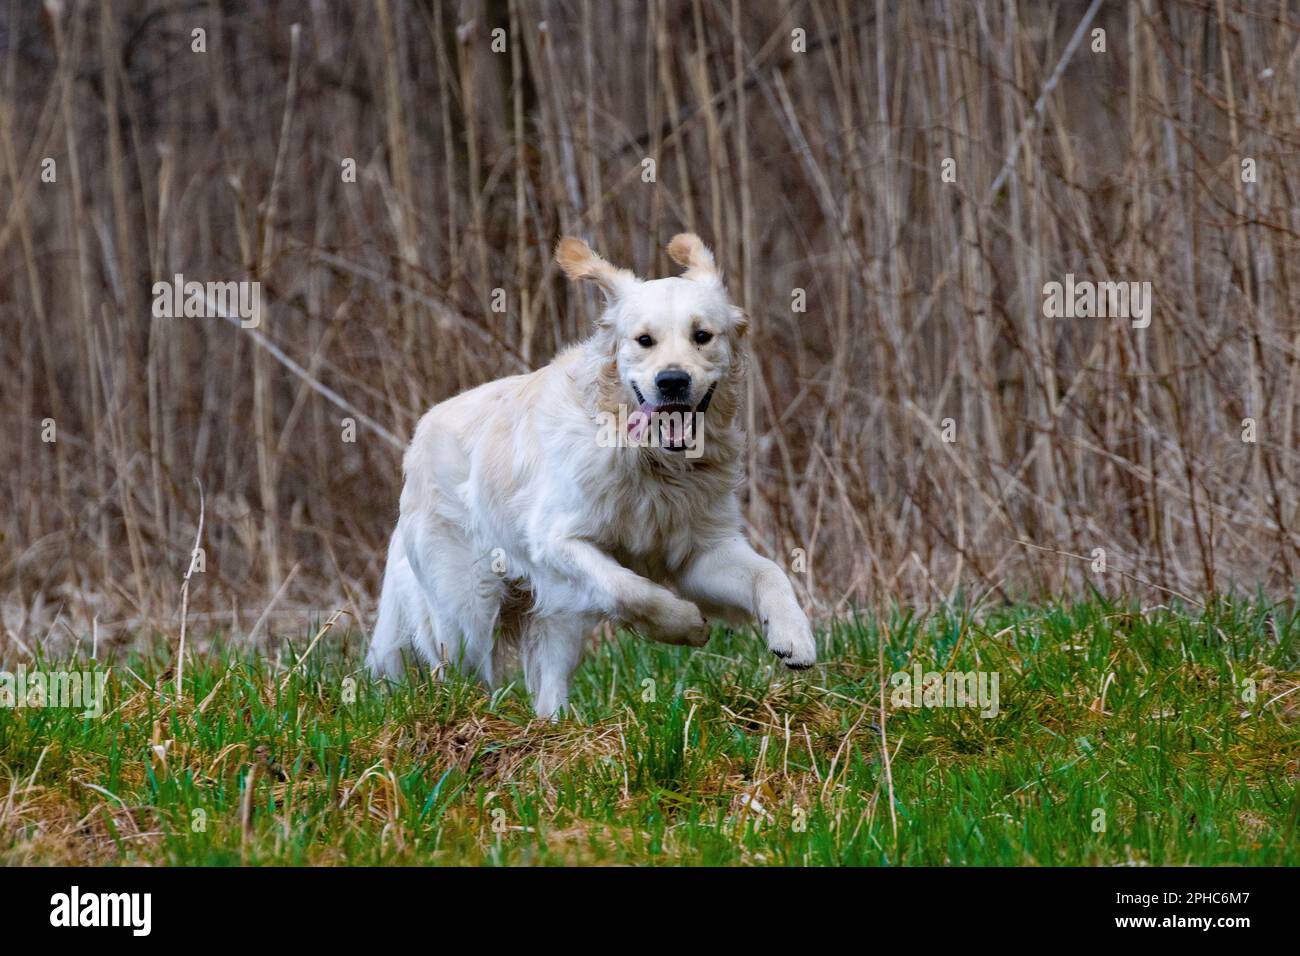 A large white dog sprinting in a clearing Stock Photo